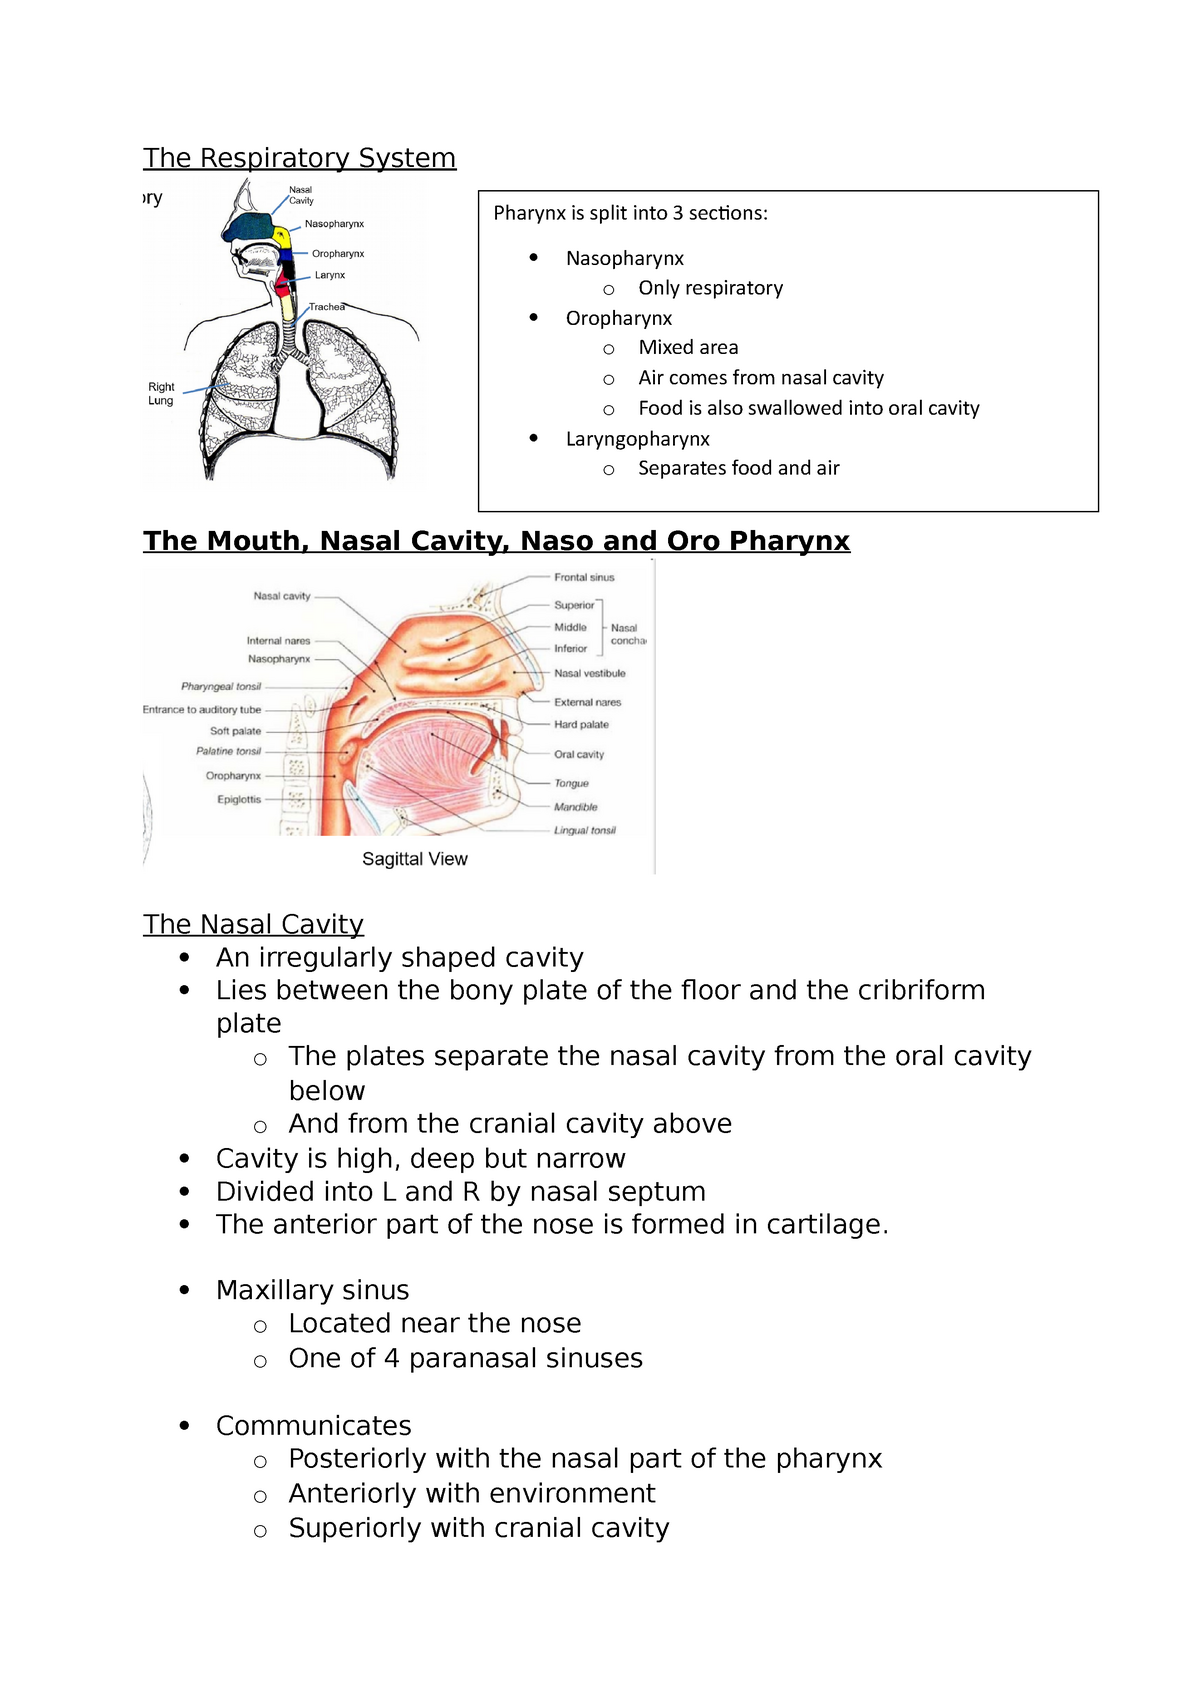 introduction to respiratory system essay